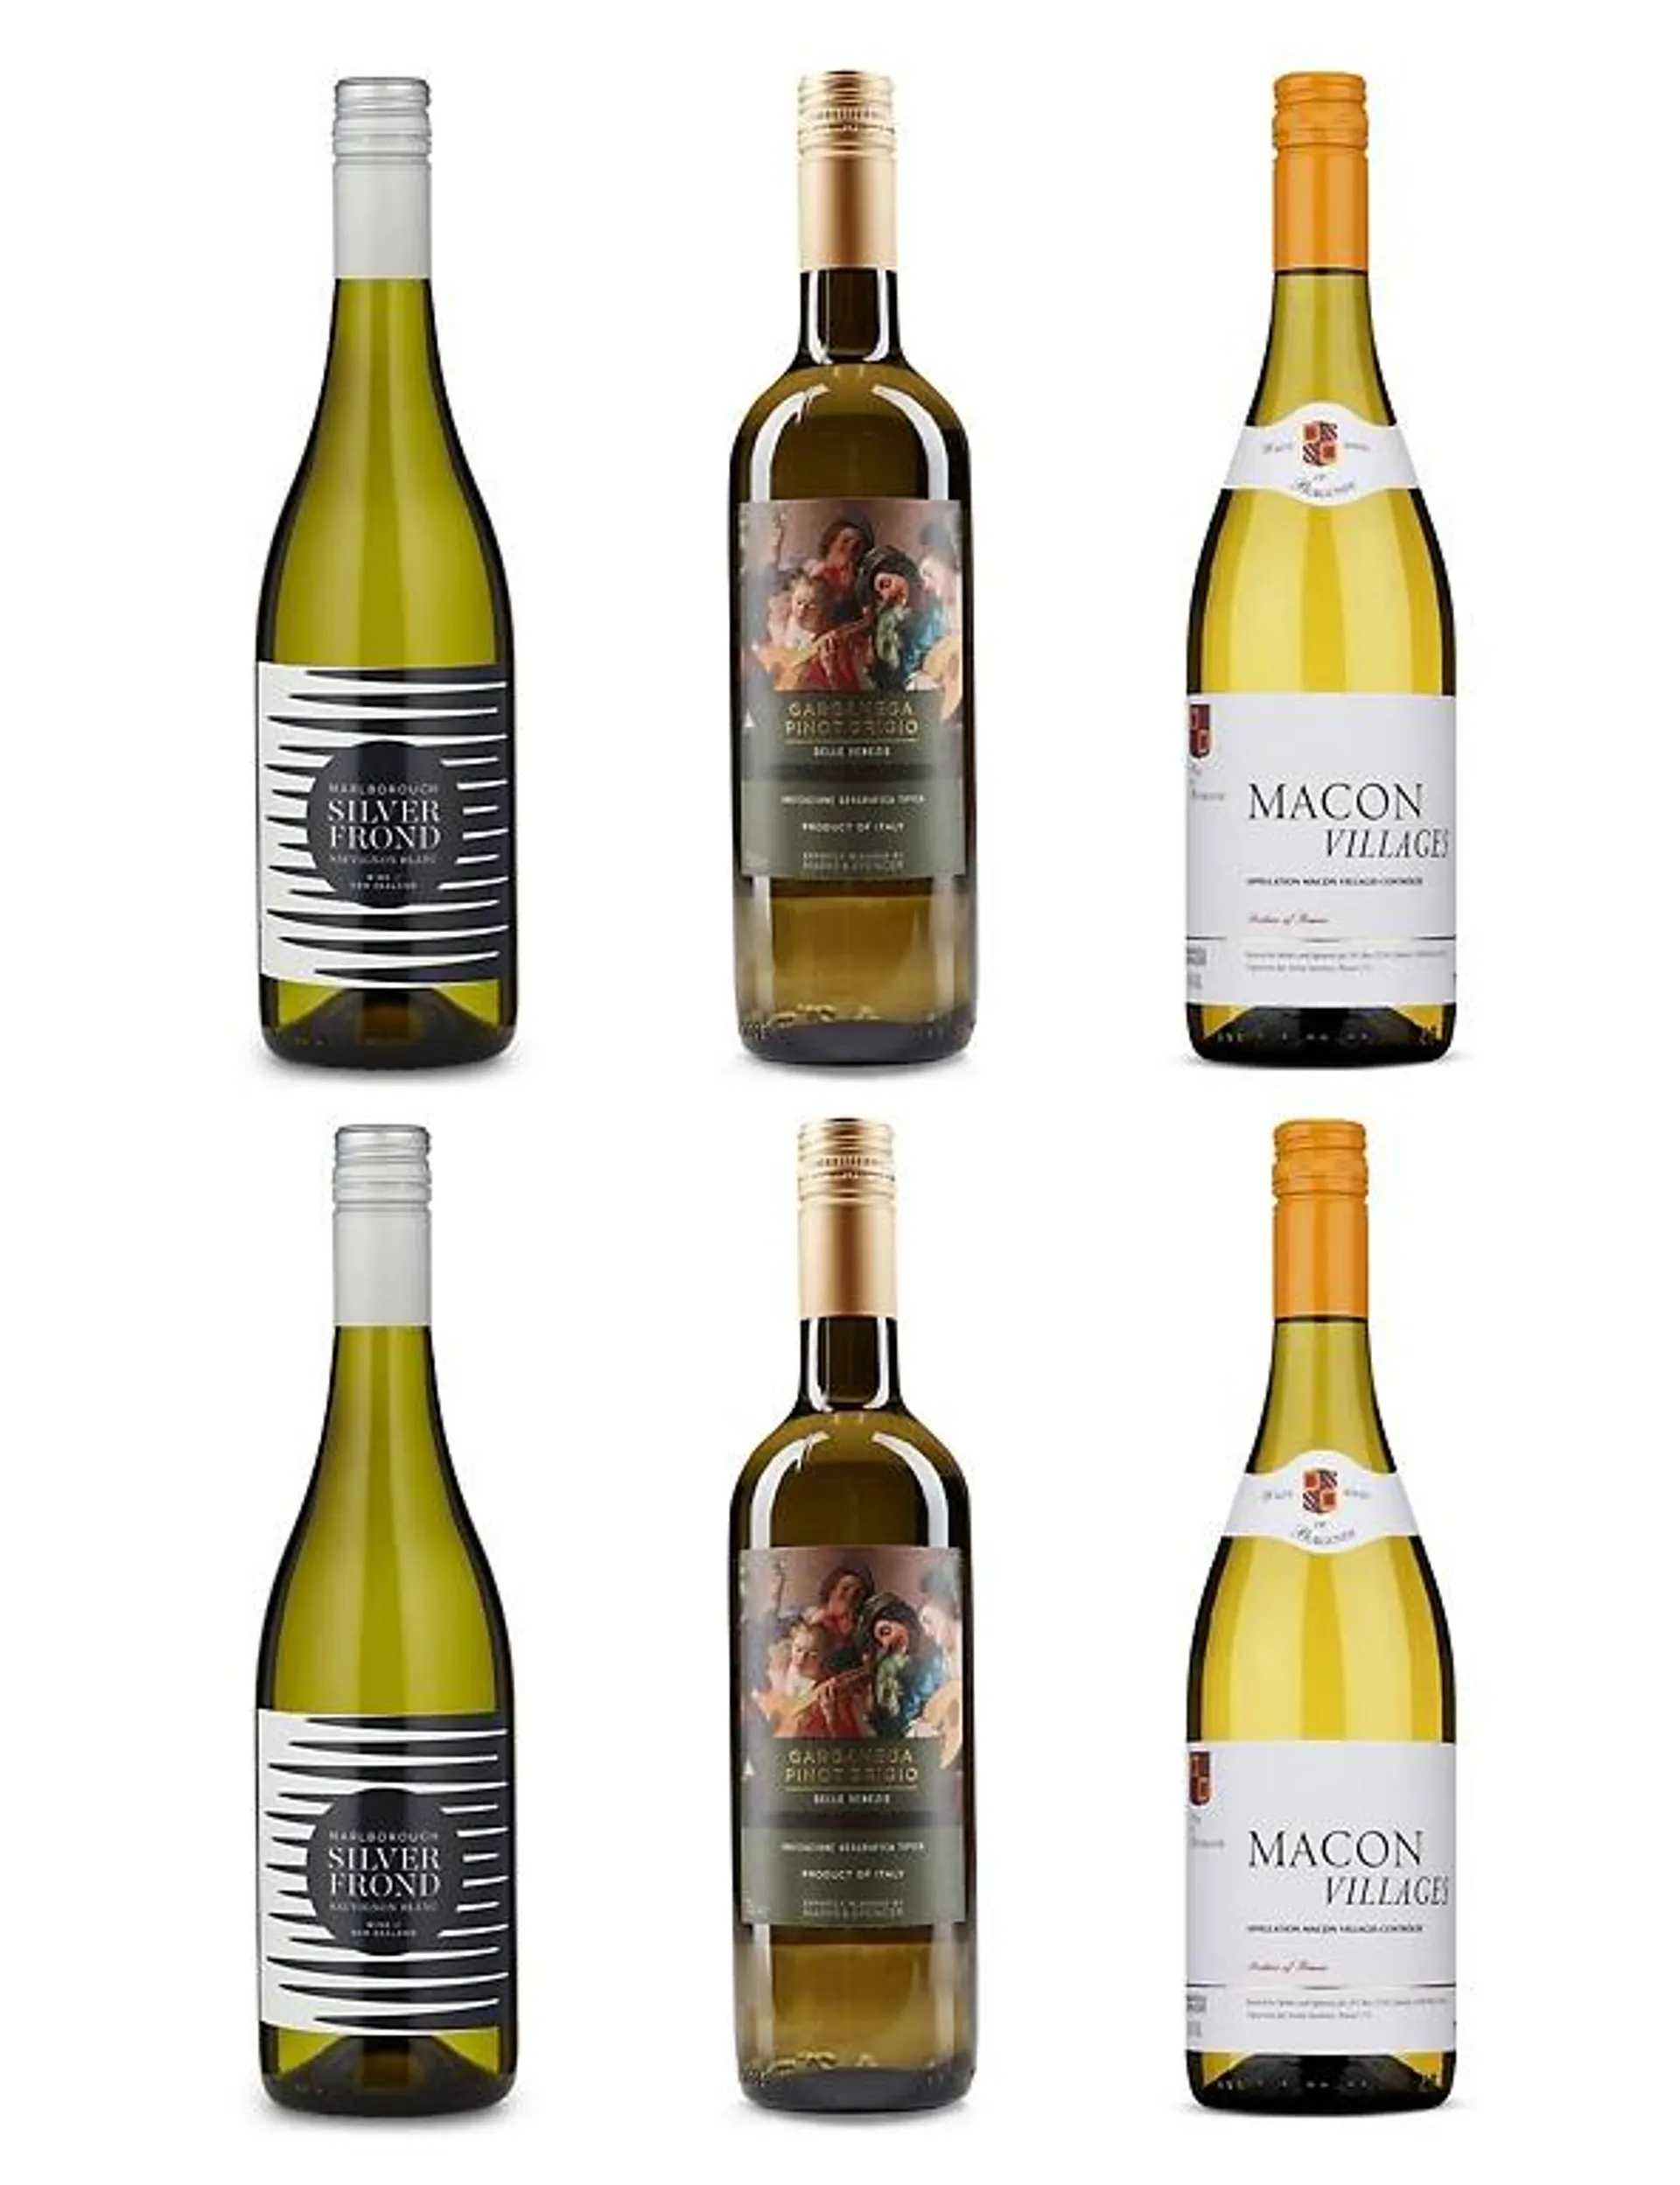 White Wine Bestsellers Case - Case of 6